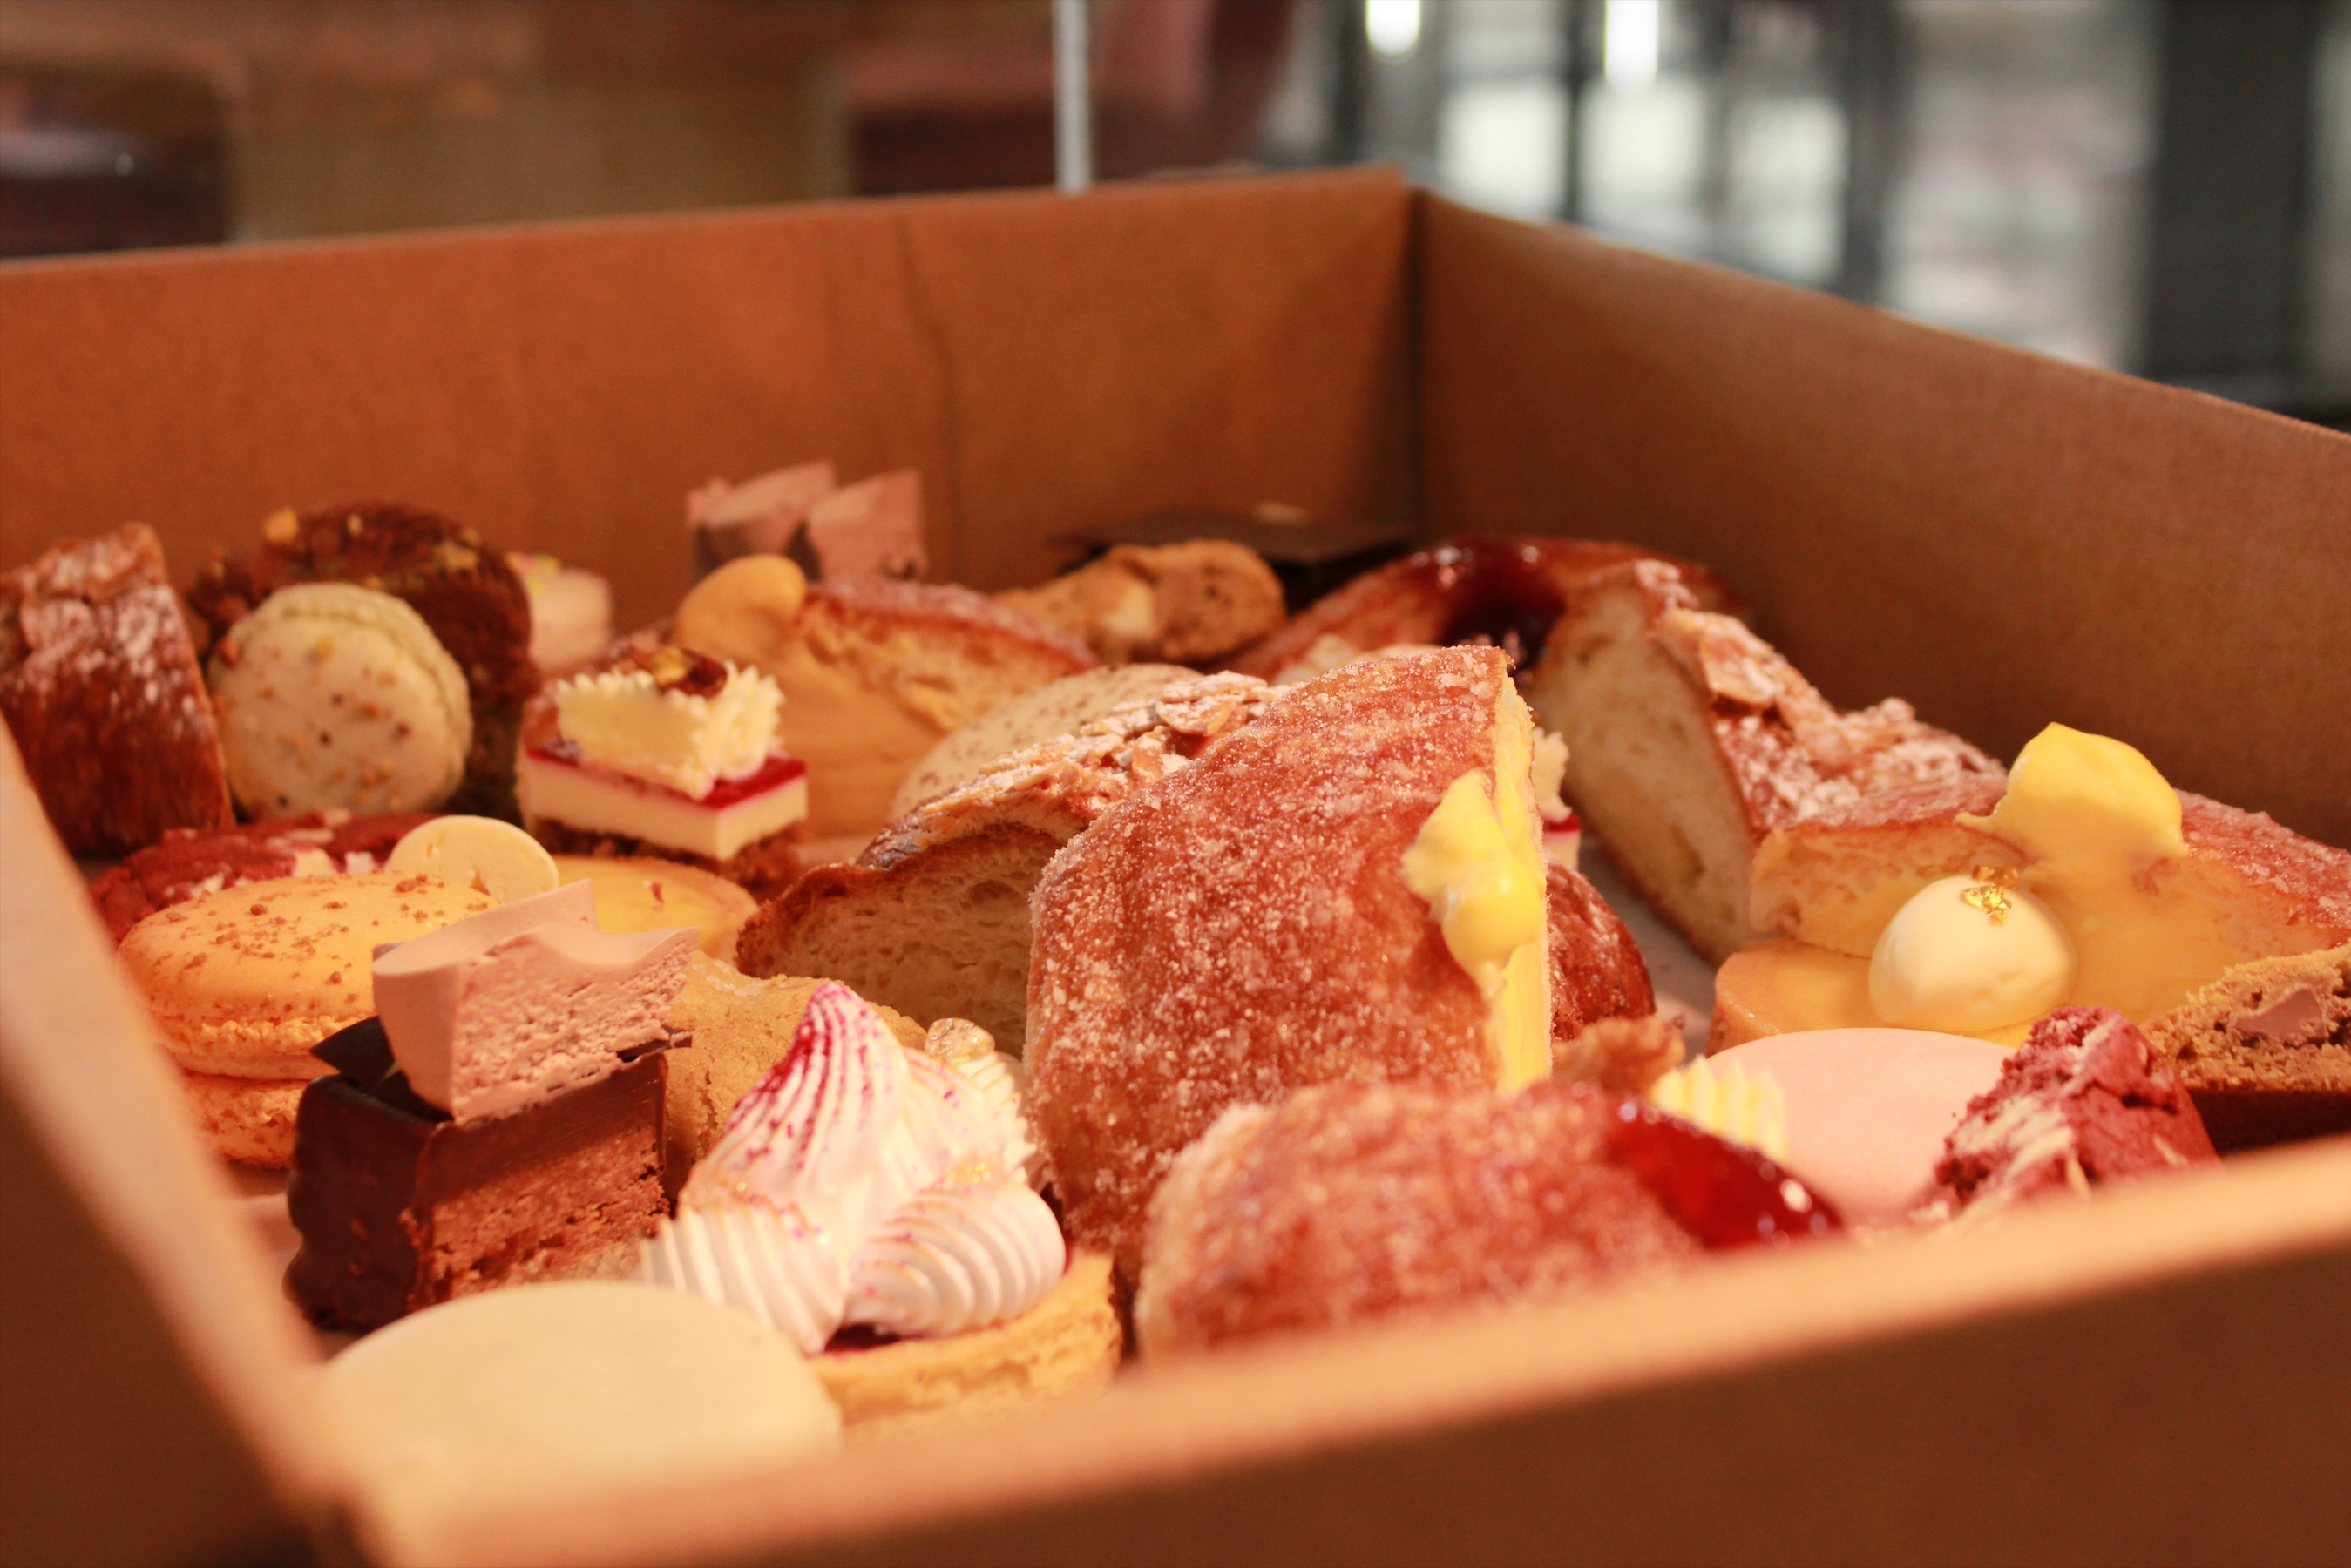 French Pastries and Sweets Platter